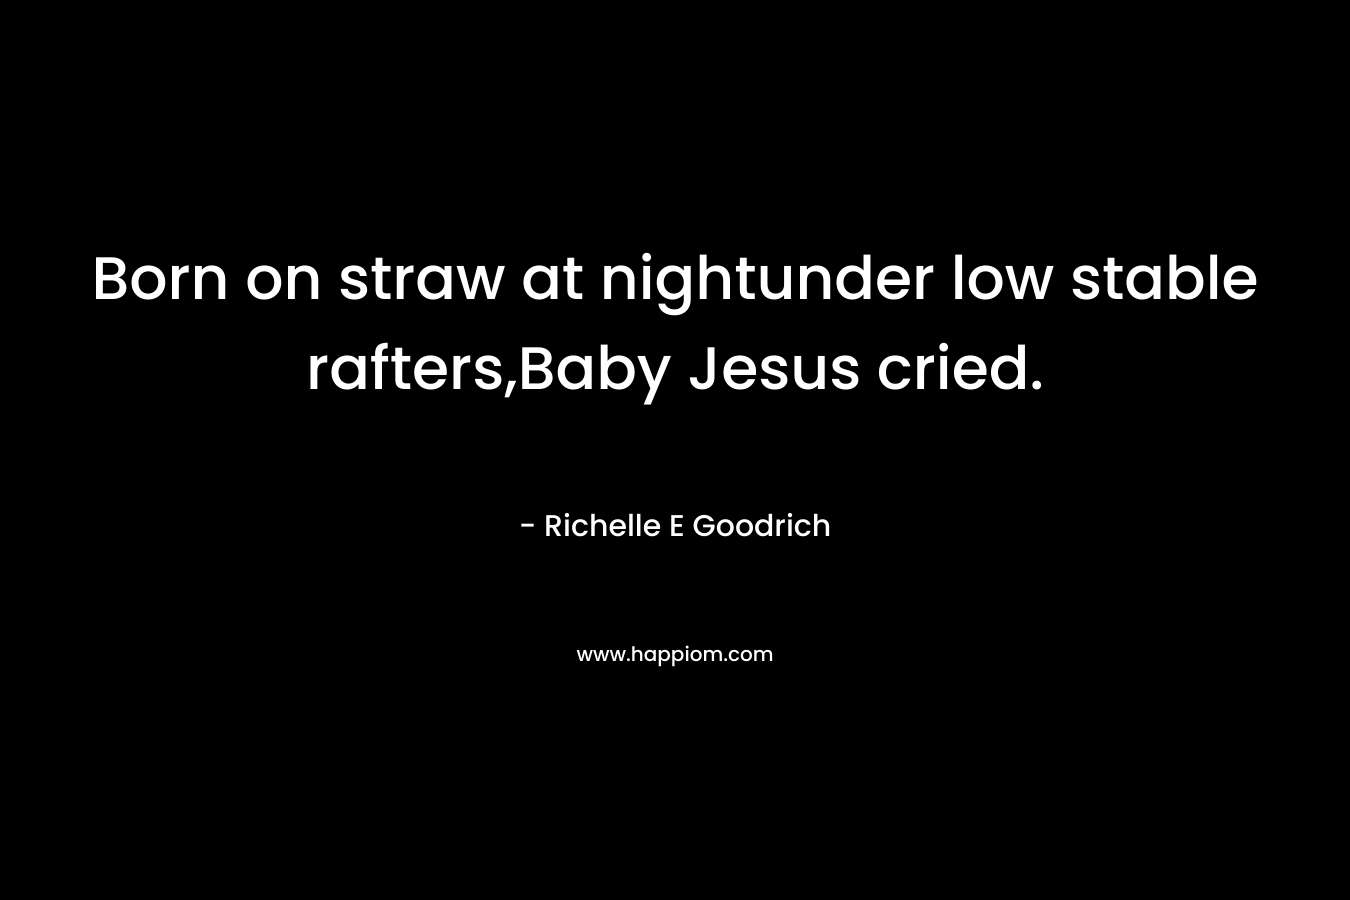 Born on straw at nightunder low stable rafters,Baby Jesus cried. – Richelle E Goodrich